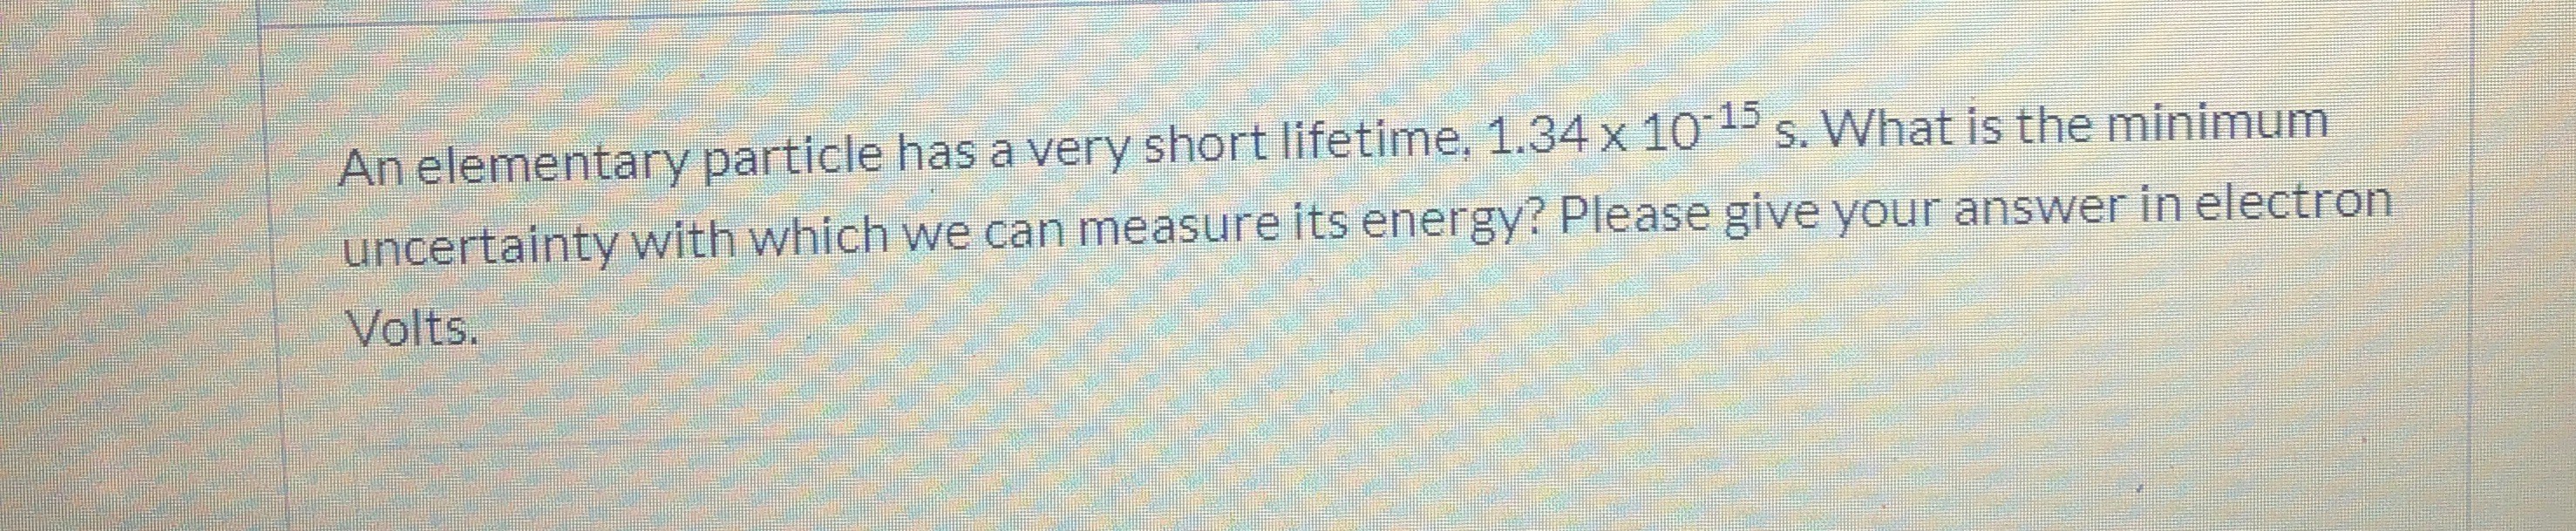 An elementary particle has a very short lifetime, 1.34 x 101 s. What is the minimum
uncertainty with which we can measure its energy? Please give your answer in electron
Volts.
